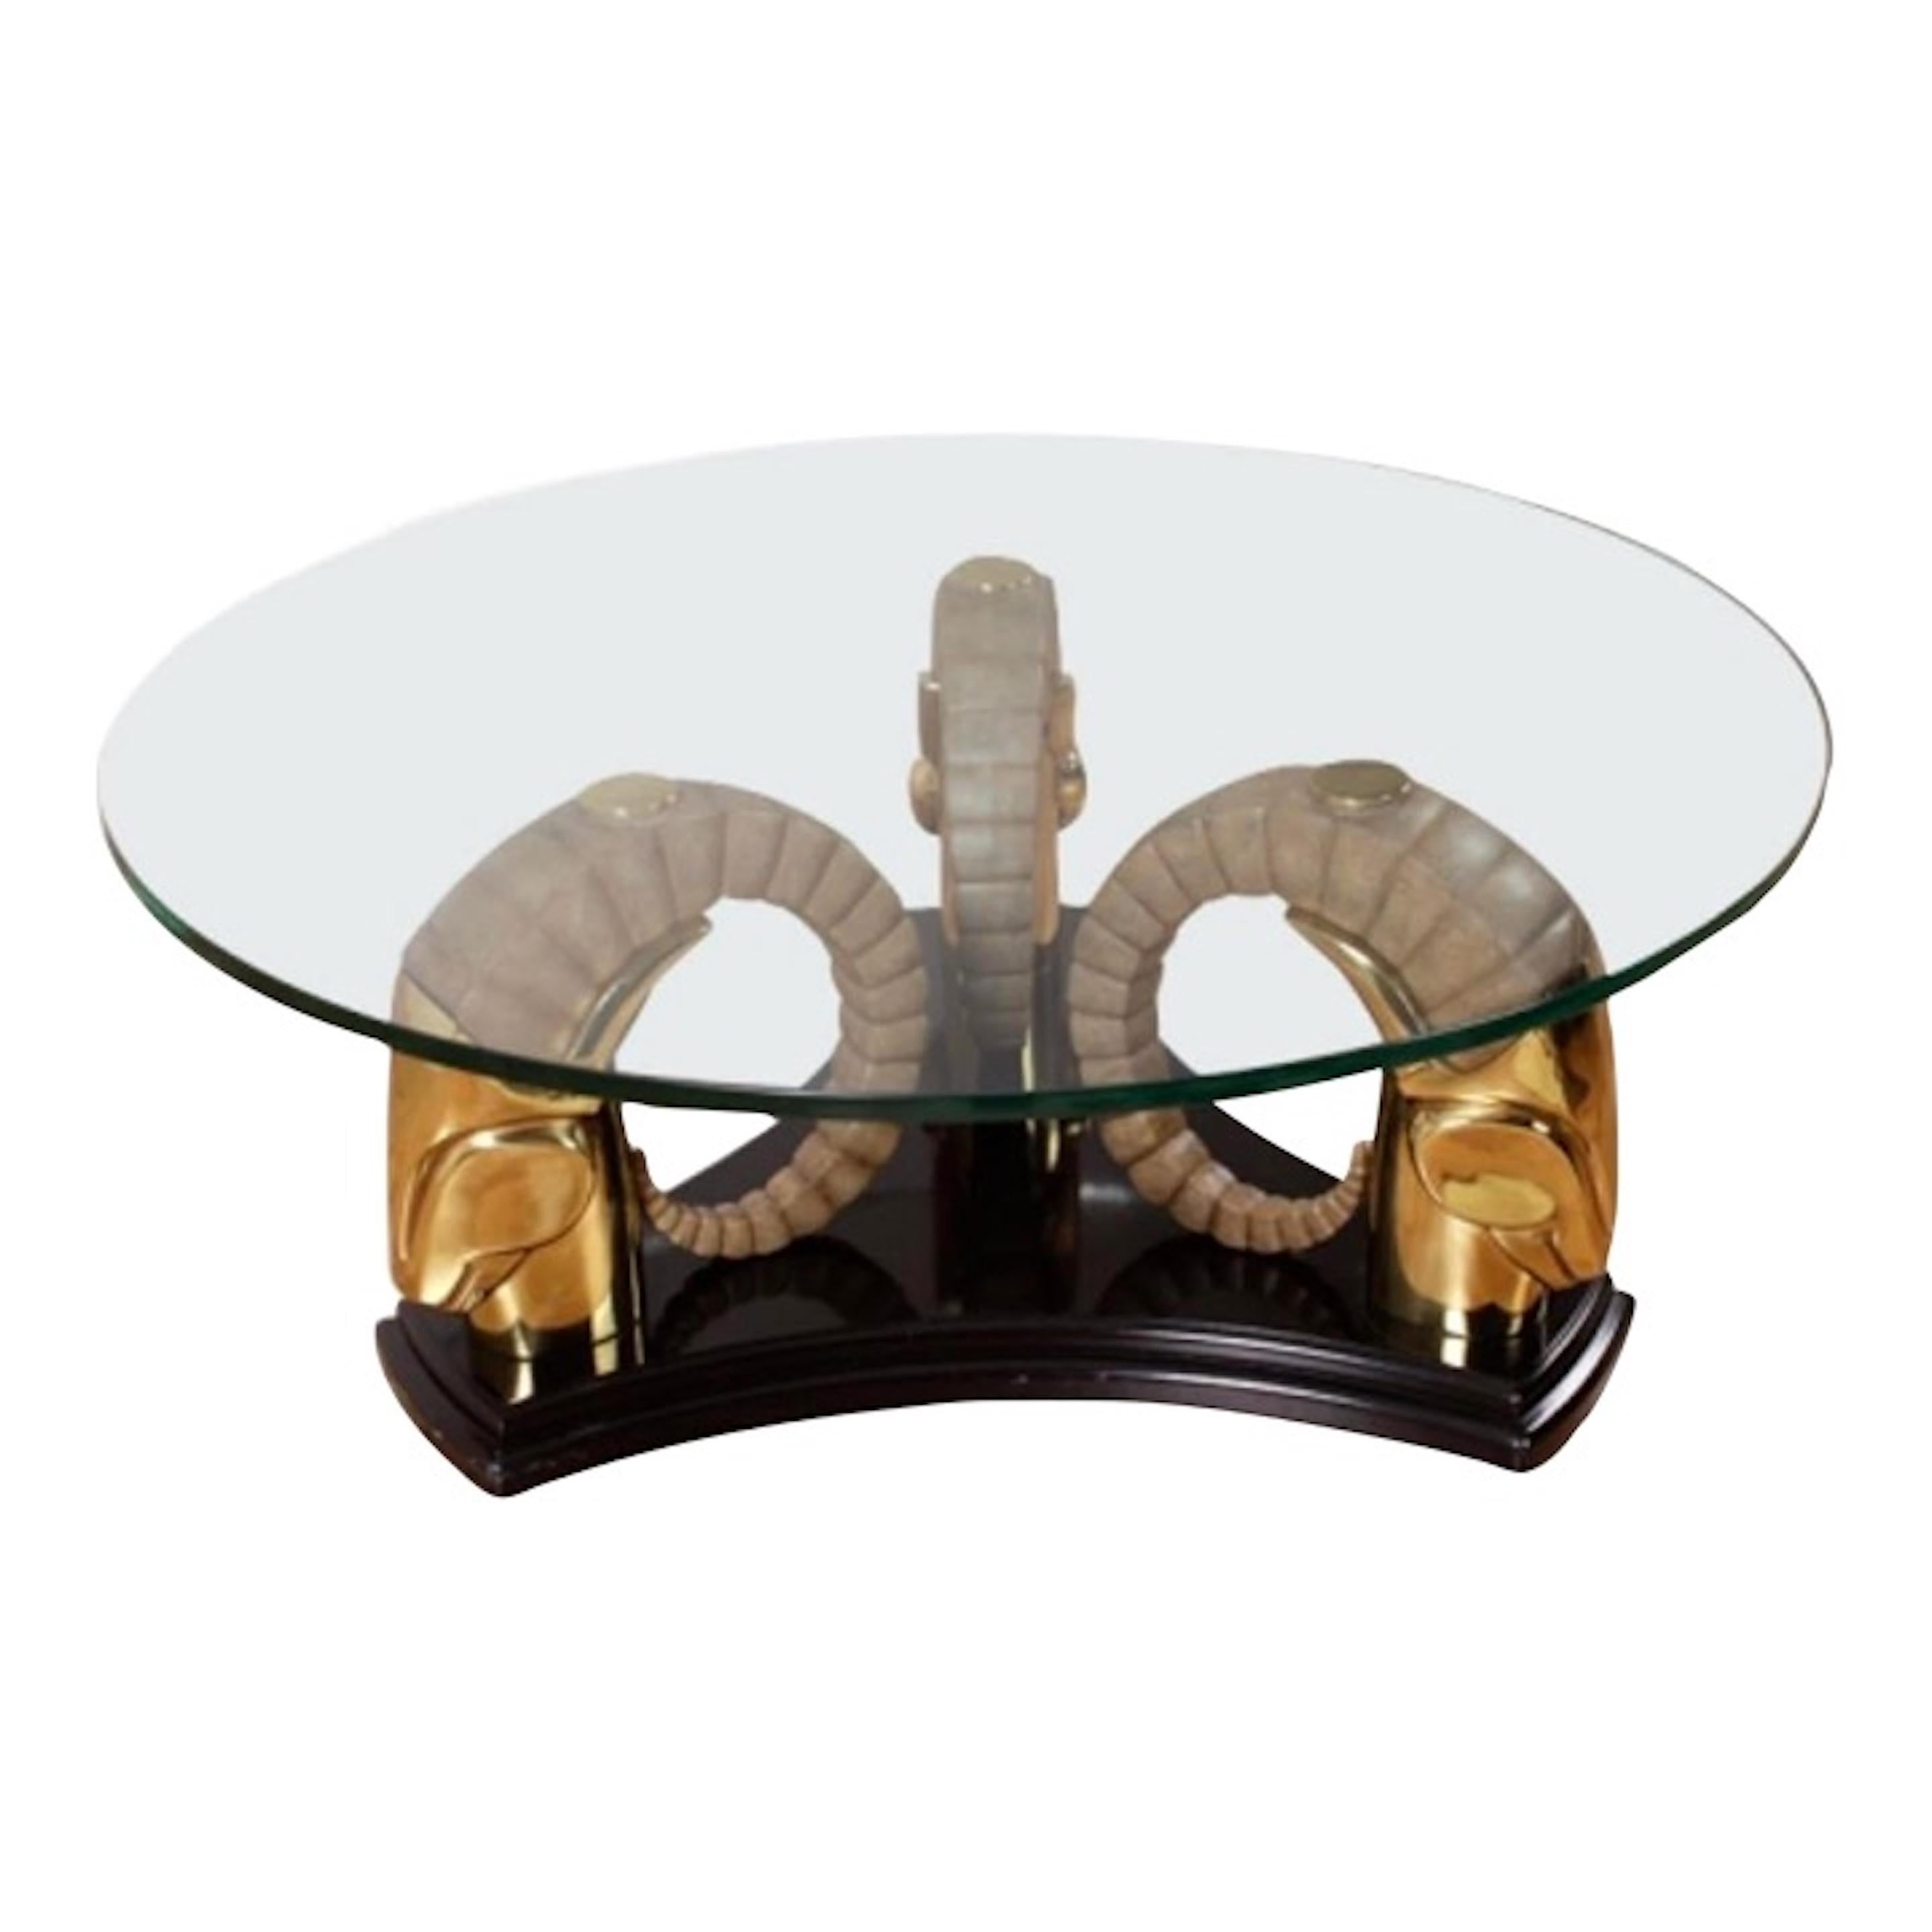 A stylish and elegant piece of furniture that adds a touch of glamour to any living space. Made from high-quality brass, this table base features a stunning ram's head design that exudes a vintage Hollywood Regency vibe. Made by Drexel Heritage.